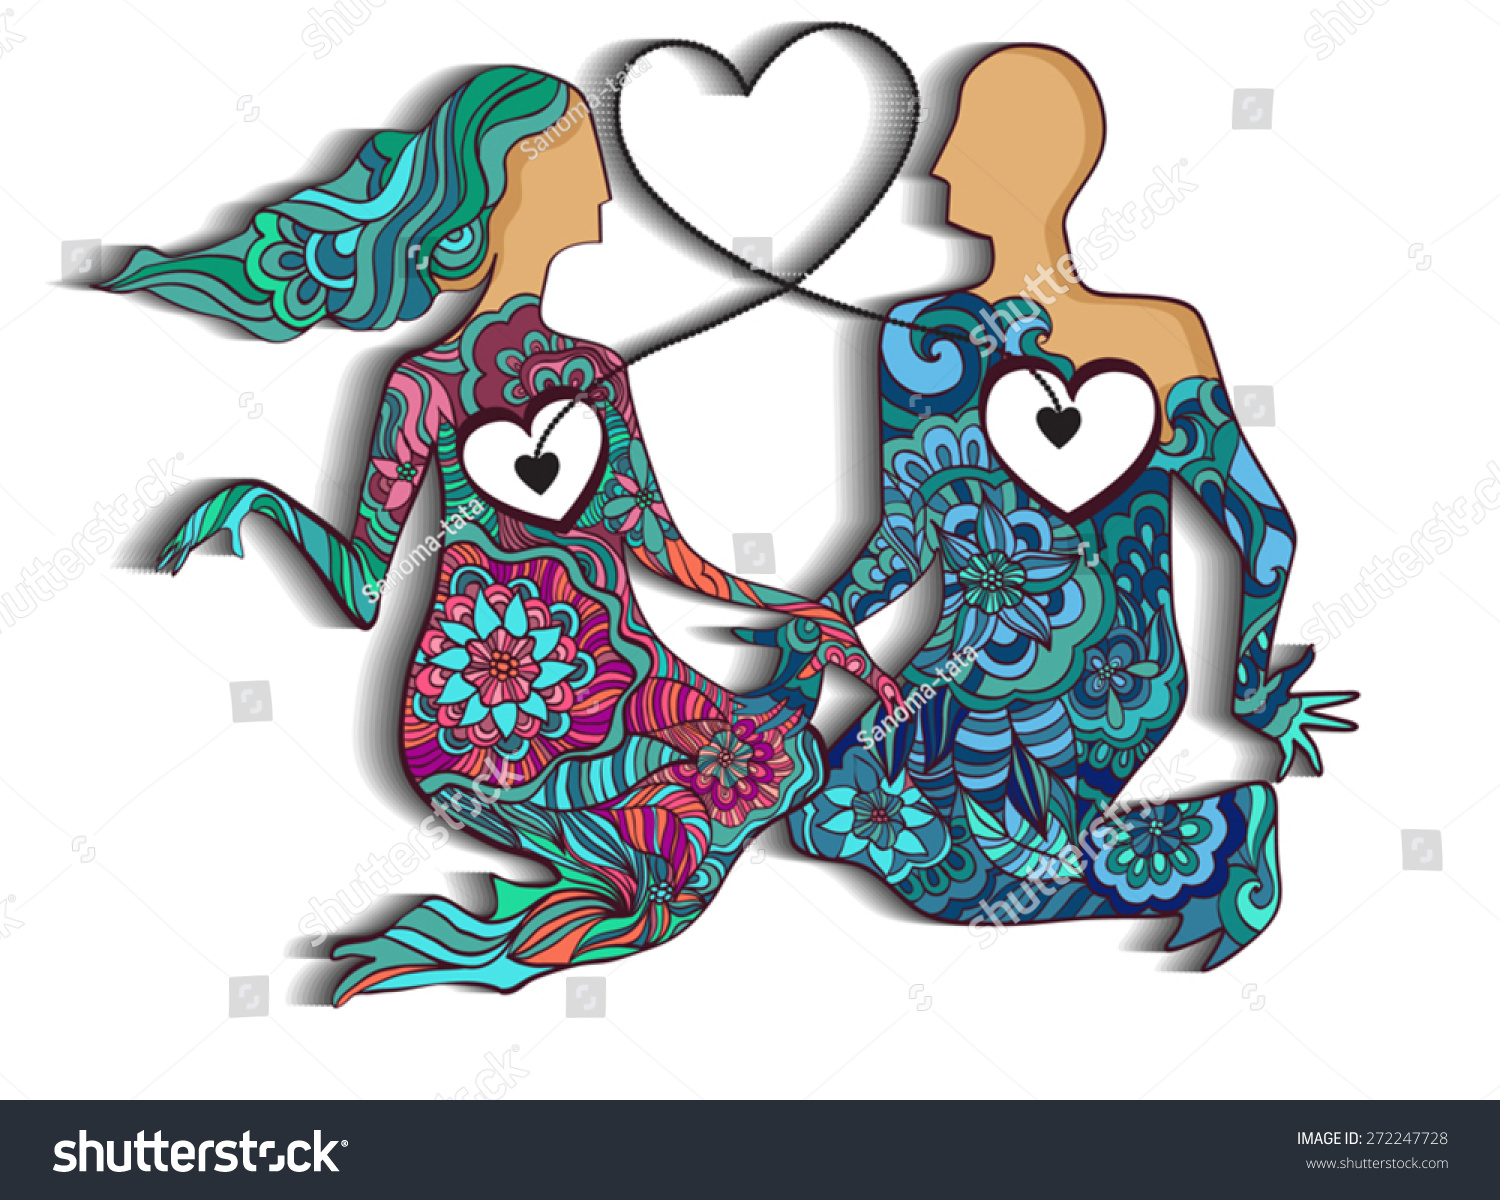 Abstract Couple Of Lovers Stock Vector Illustration 272247728 